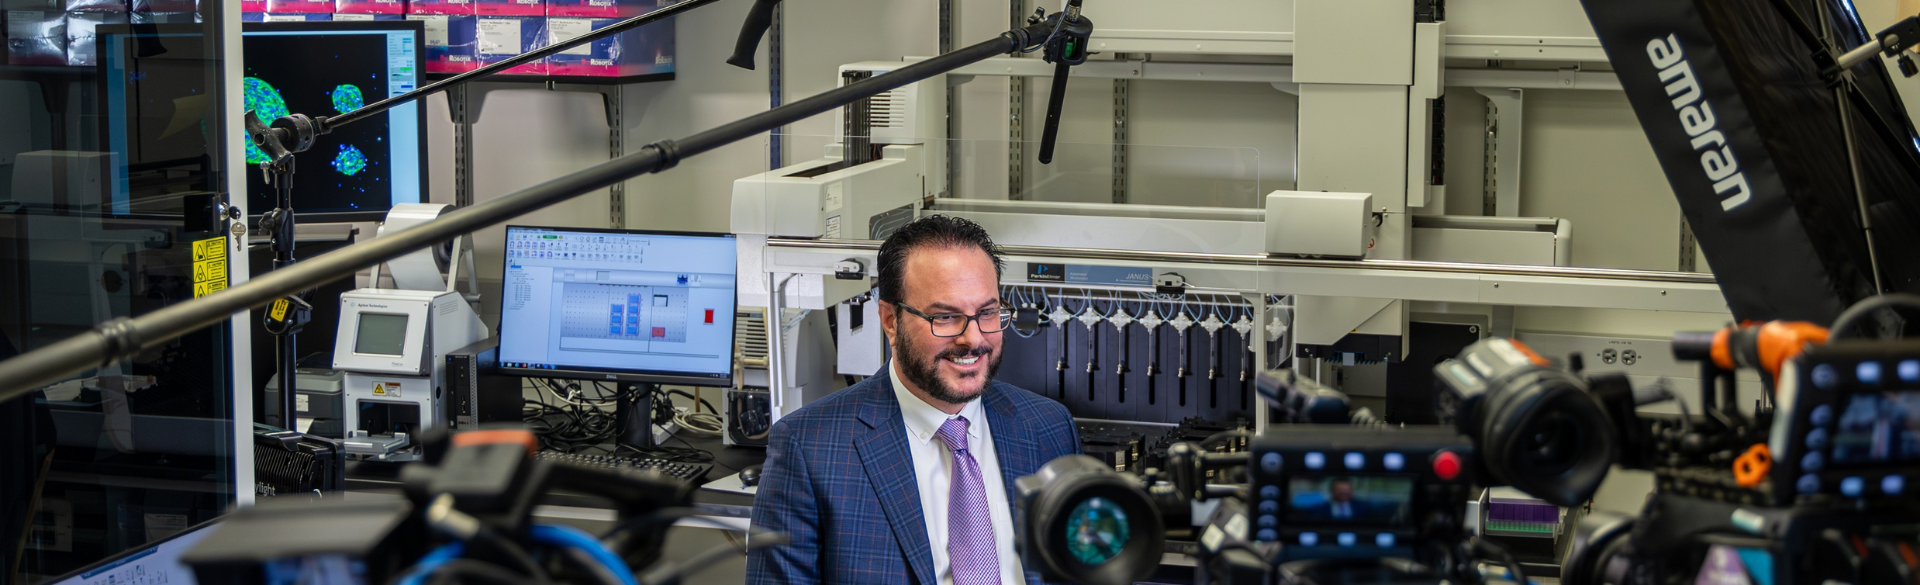 Dr. Dan LaBarbera smiles in his lab. He is surrounded by video cameras during an interview with CNBC.